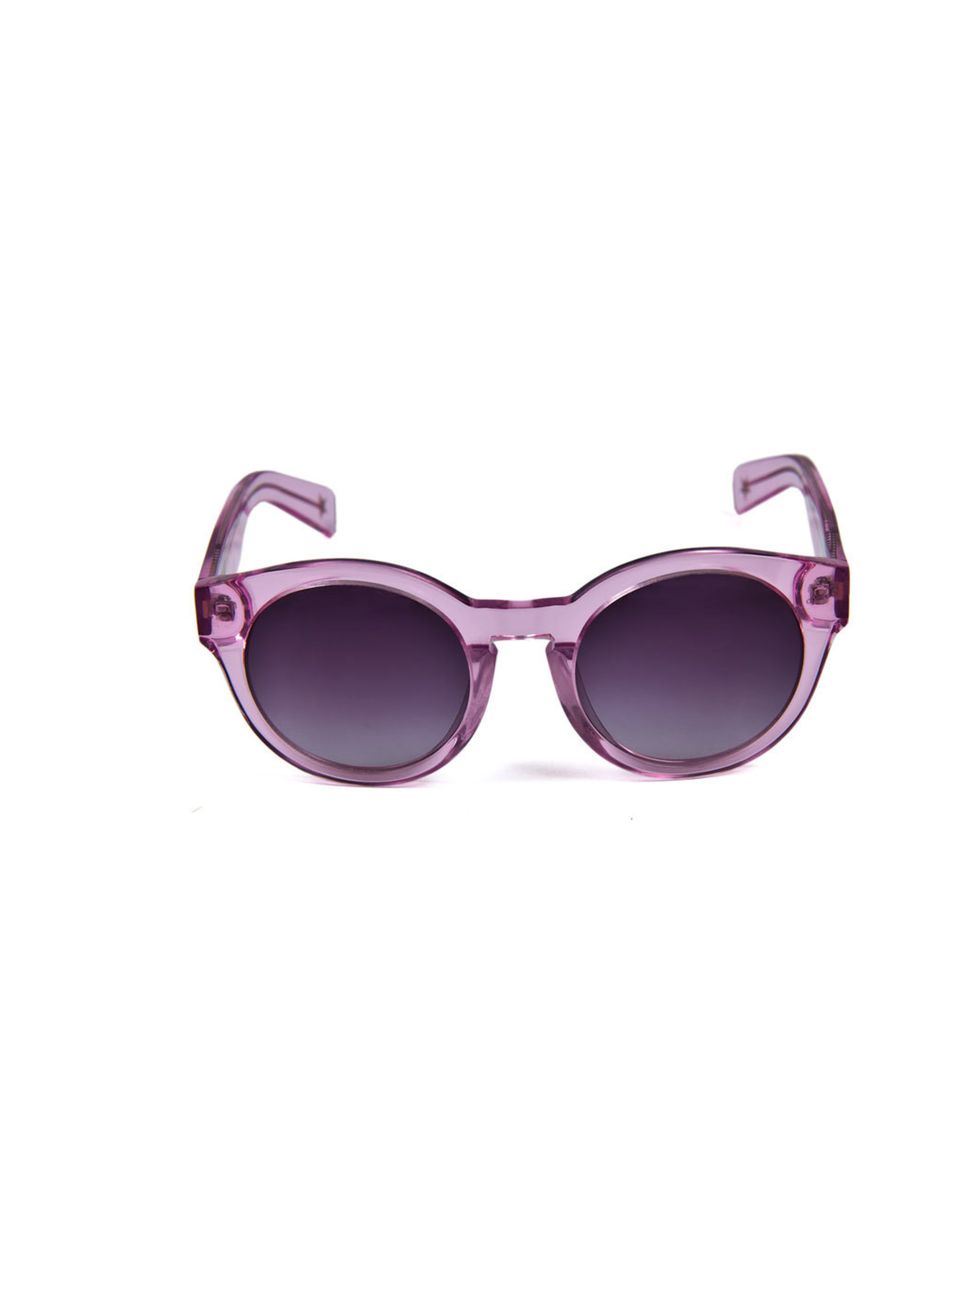 <p>How could a girl resist? And be warned, these bespoke acetate sunglasses are just the first of a long line of irresistible accessories from Kurt Geiger this year <a href="http://www.kurtgeiger.com/sarah-round-glass.html">KG Kurt Geiger</a> round sungl